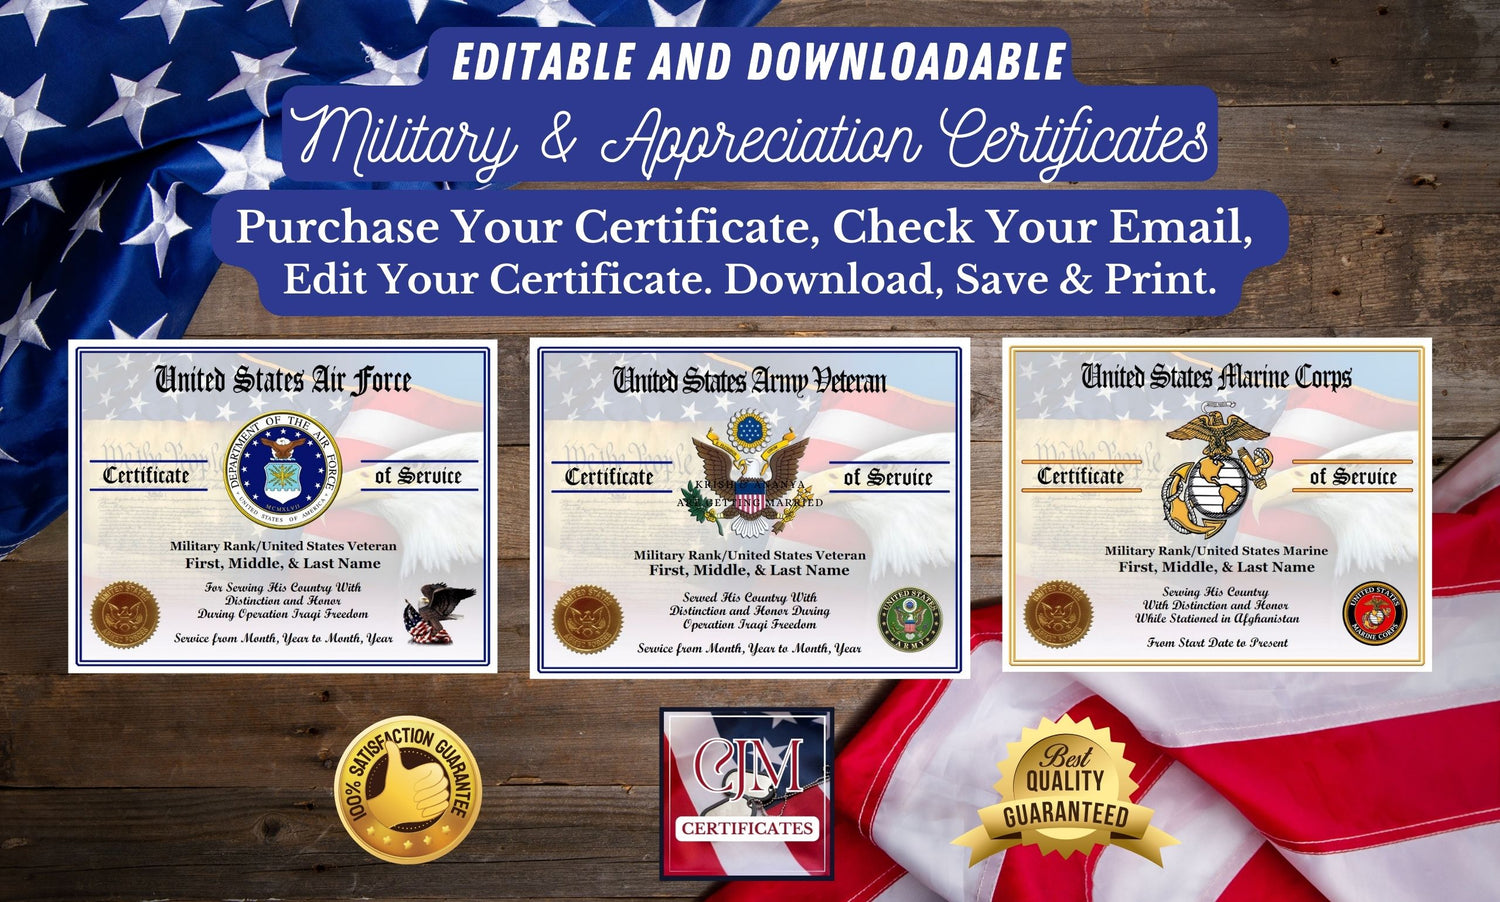 Edit and Download Military Certificates at http://www.cjmcertificates.com